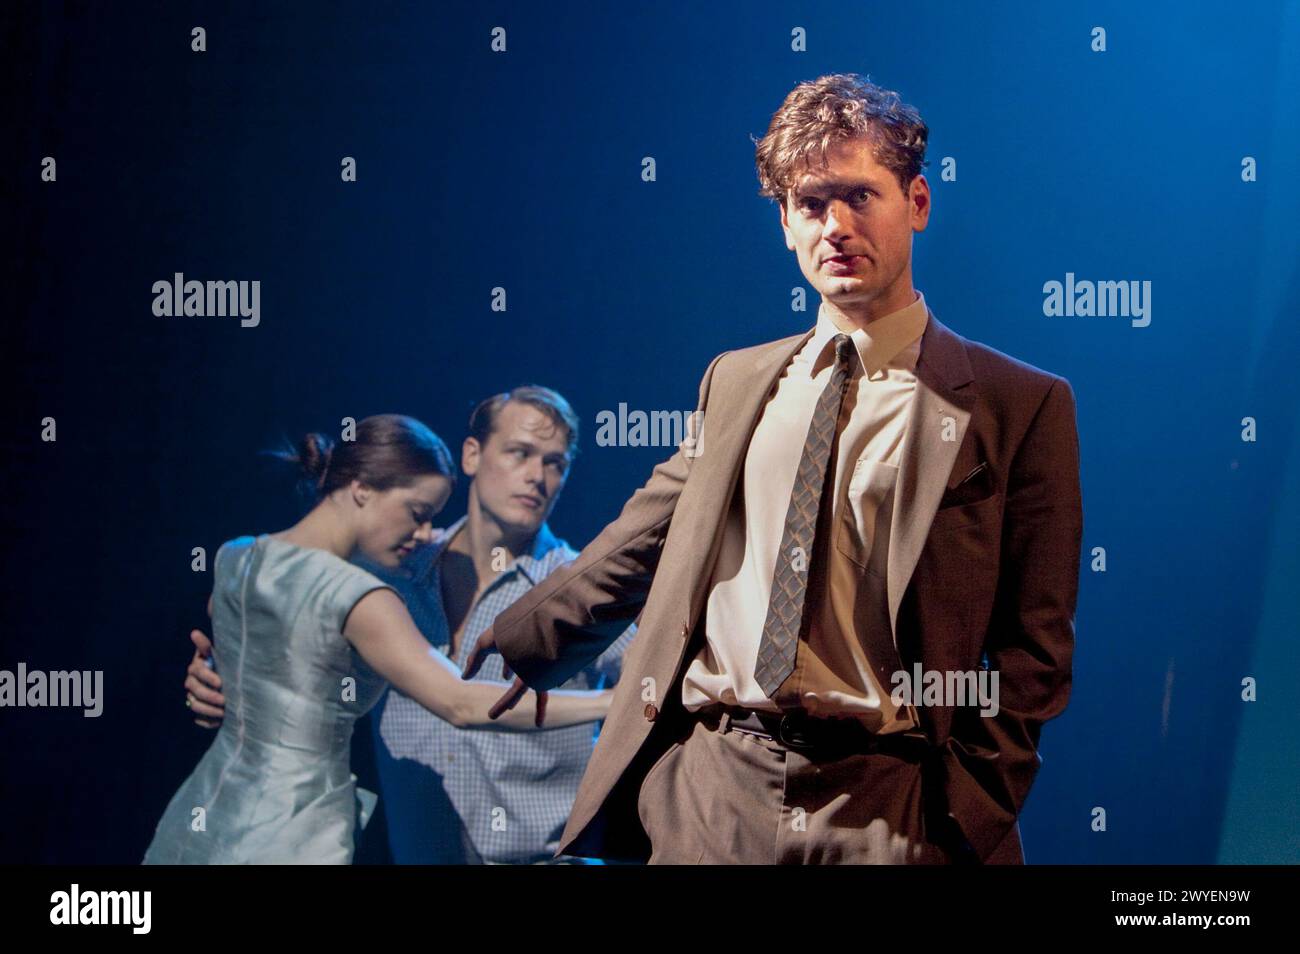 l-r: Michelle Ryan (Marge Sherwood), Sam Heughan (Richard Greenleaf), Kyle Soller (Tom Ripley) in THE TALENTED MR. RIPLEY by Phyllis Nagy at the Theatre Royal, Royal & Derngate, Northampton,England  21/09/2010  from the novel by Patricia Highsmith  design: Hannah Clark  lighting: Anna Watson  director: Raz Shaw Stock Photo